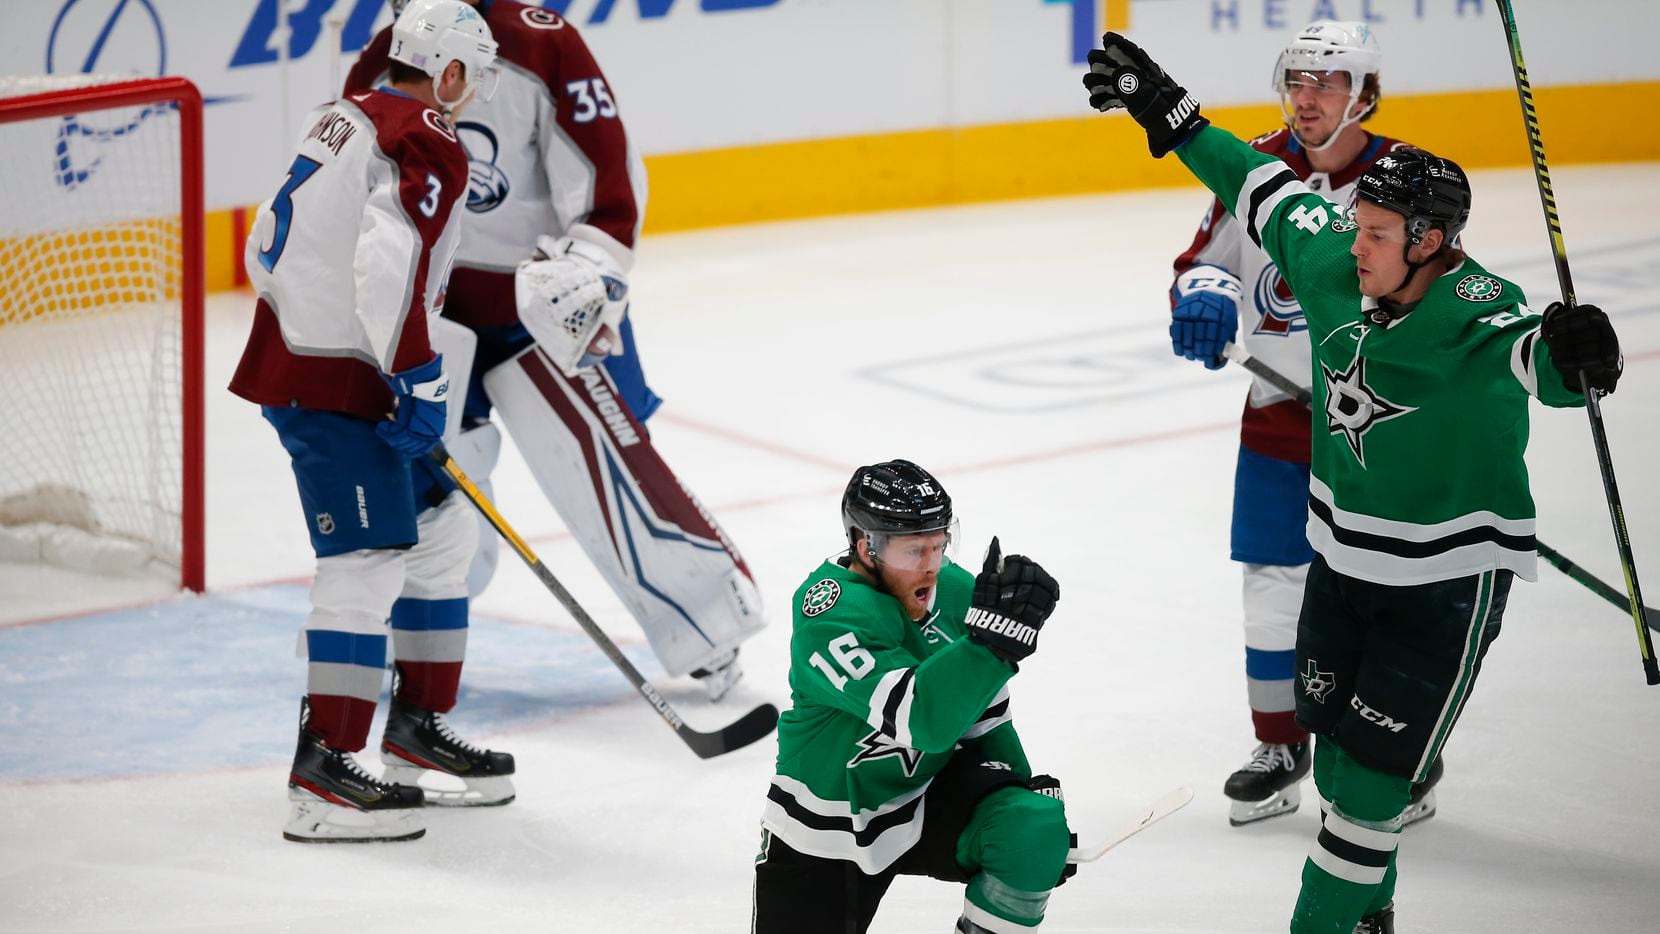 Dallas Stars forward Joe Pavelski (16) celebrates scoring his first goal of the game during the first period of an NHL hockey game against the Colorado Avalanche in Dallas, Friday, November 26, 2021. (Brandon Wade/Special Contributor)